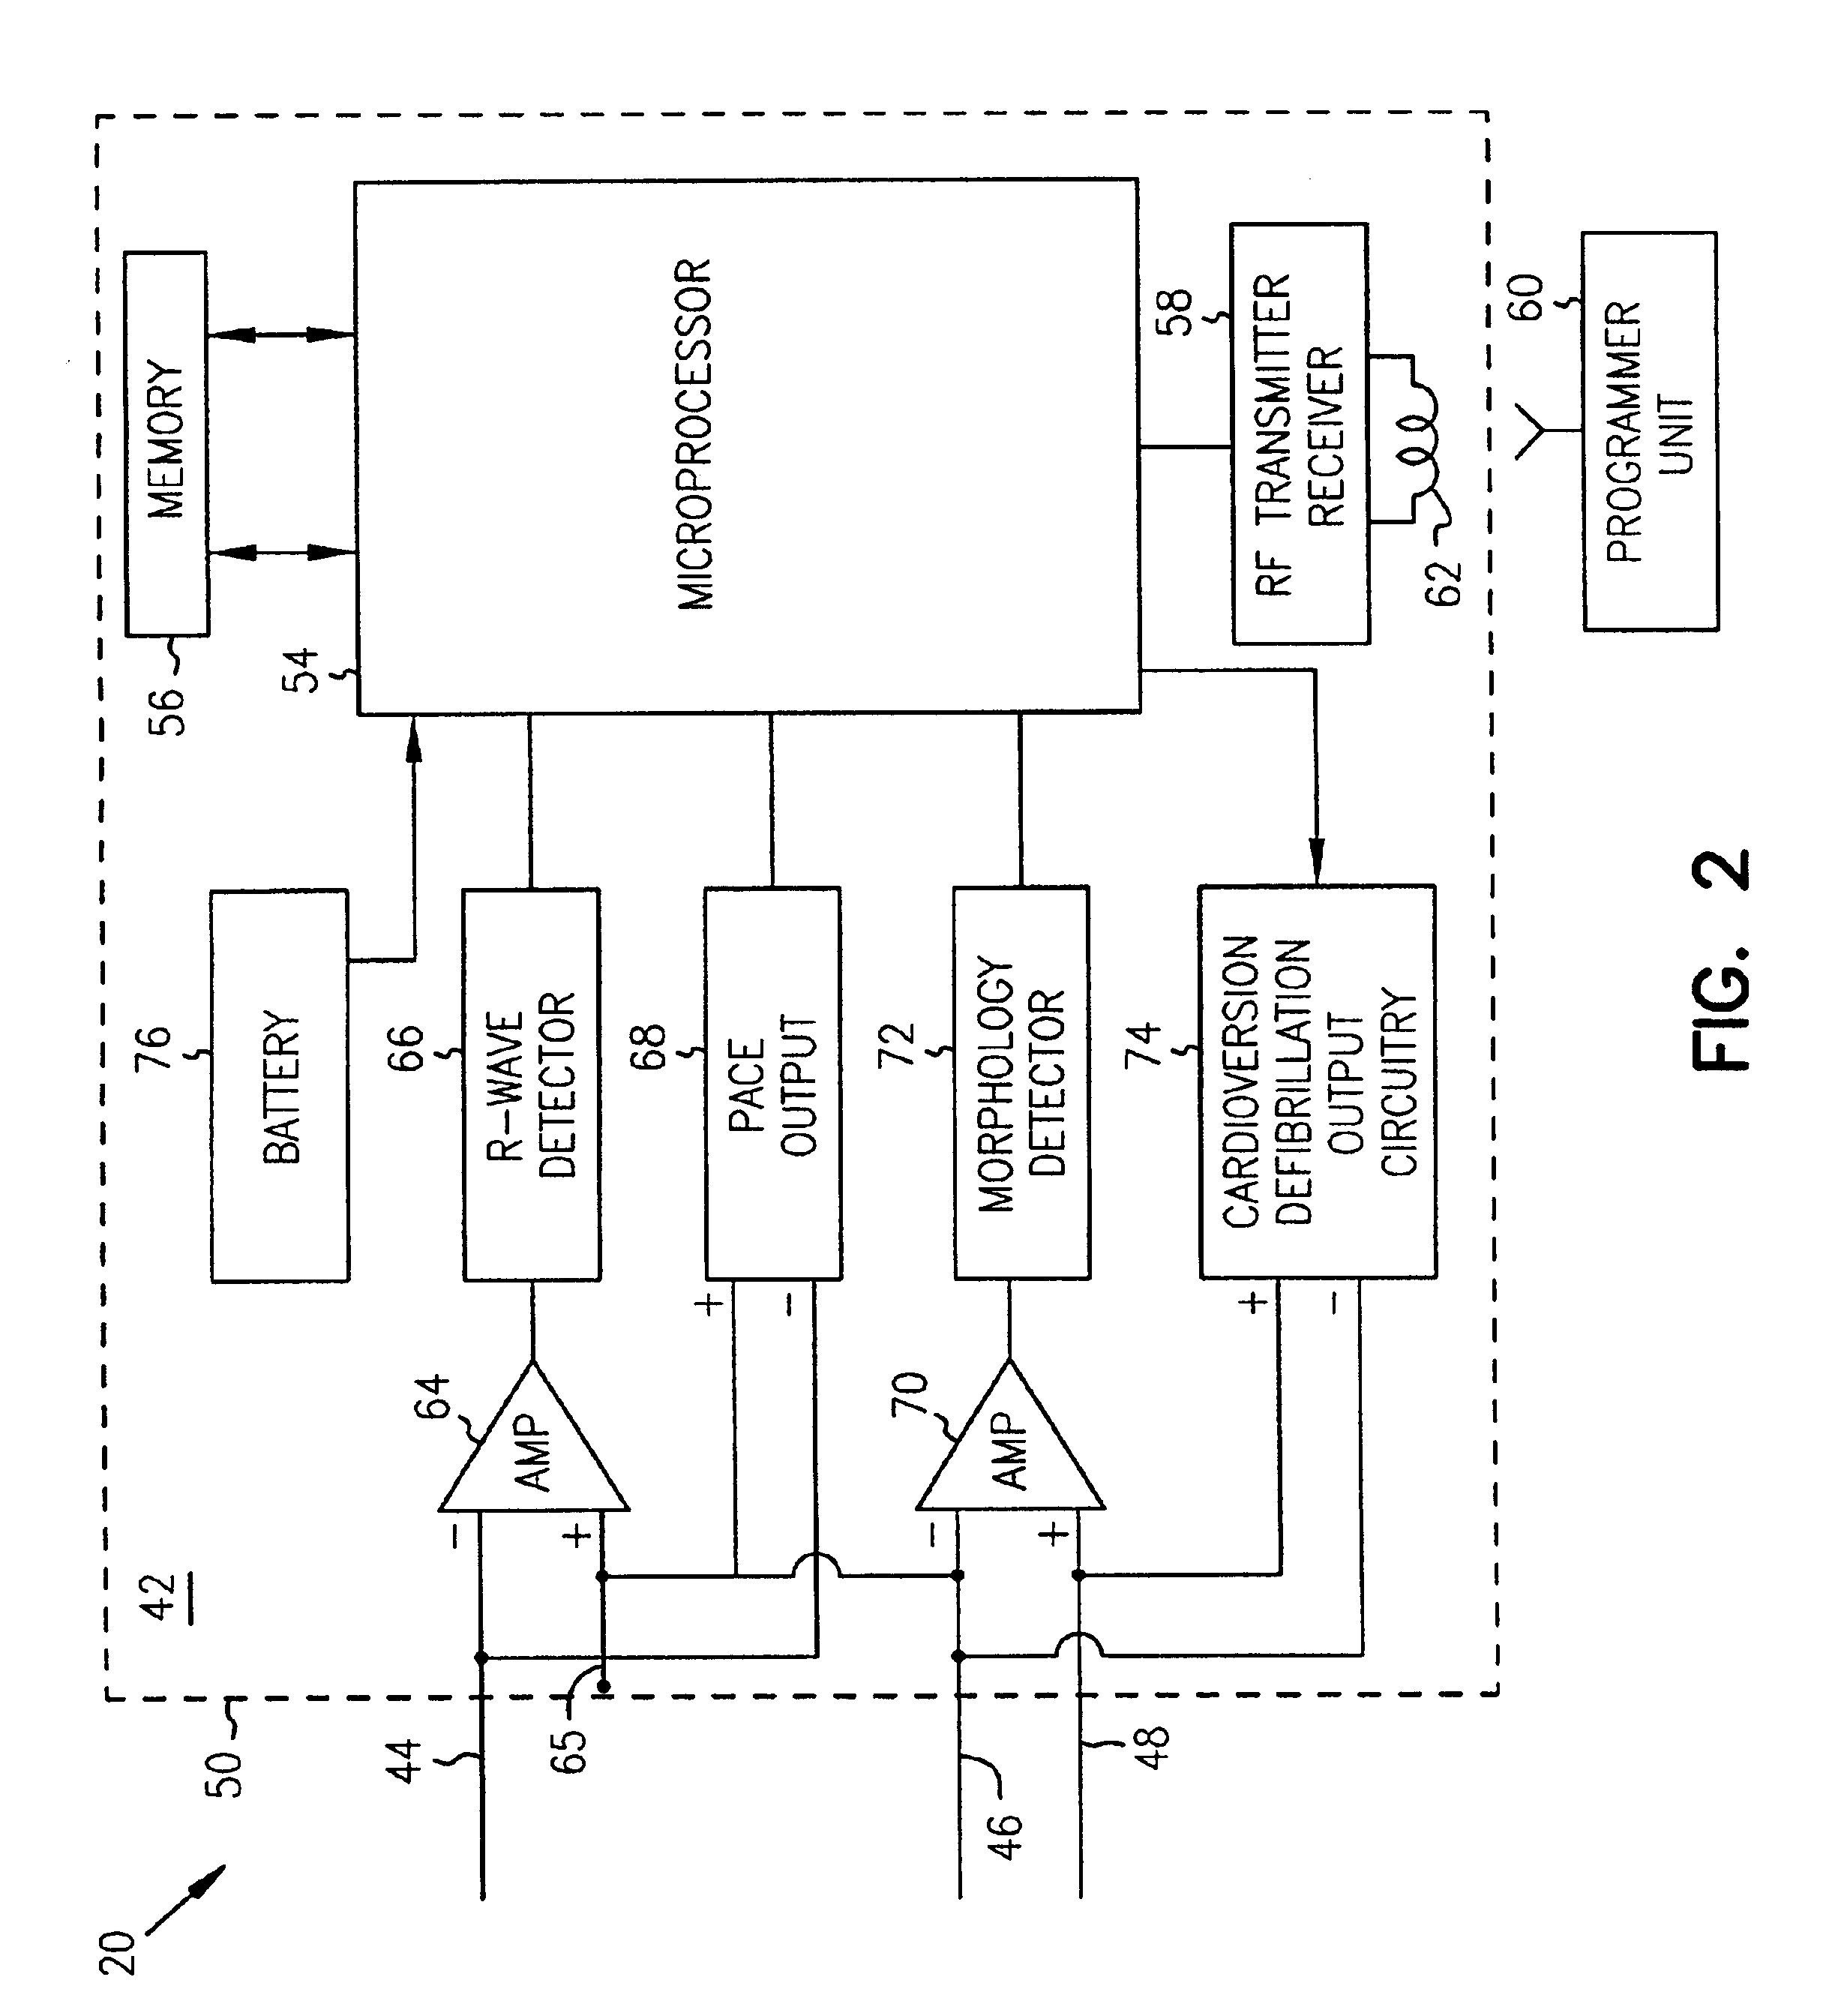 Method and system for identifying and displaying groups of cardiac arrhythmic episodes